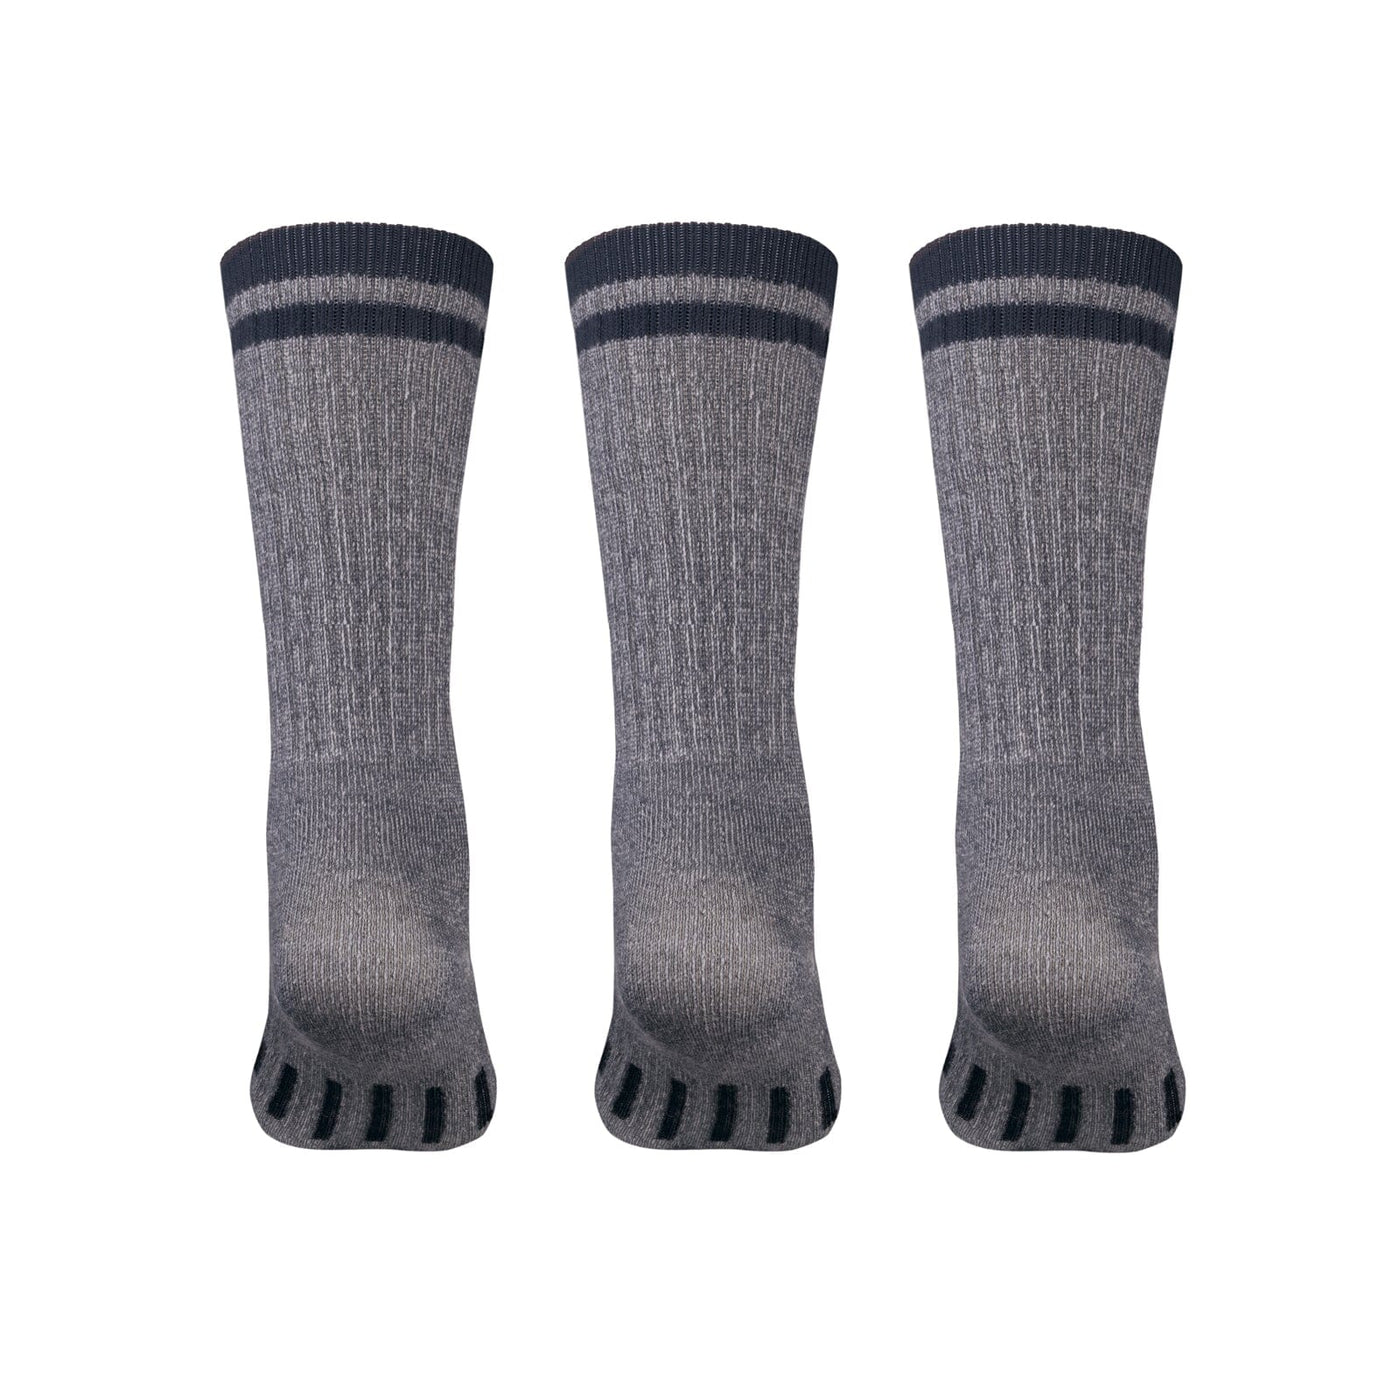 meriwool MERIWOOL Merino Wool Hiking Socks for Men and Women - 3 Pairs  Midweight cushioned Thermal Socks - Warm and Breathable